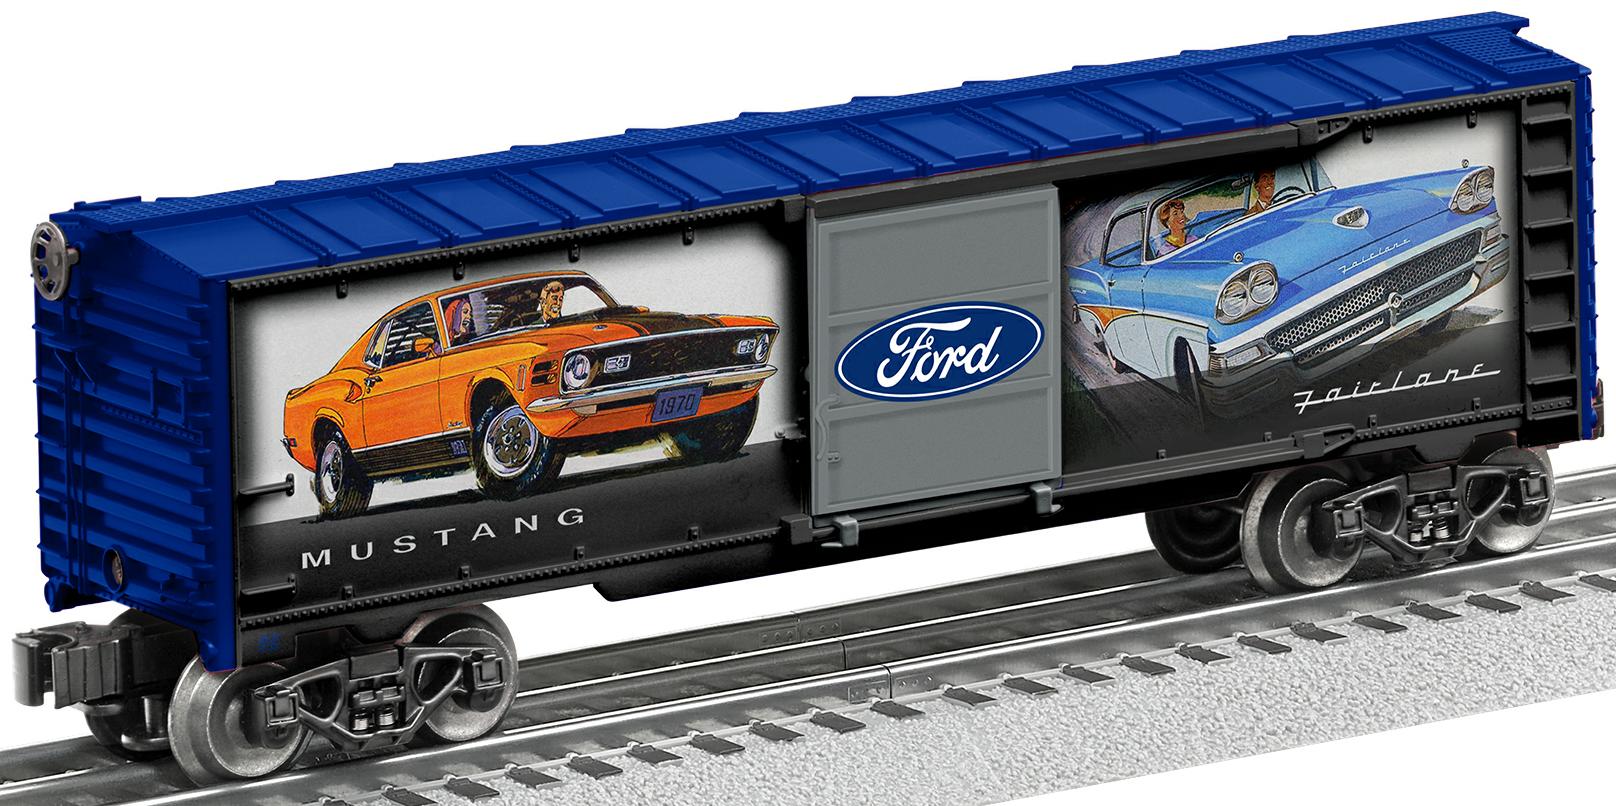 Ford Vintage Boxcar image